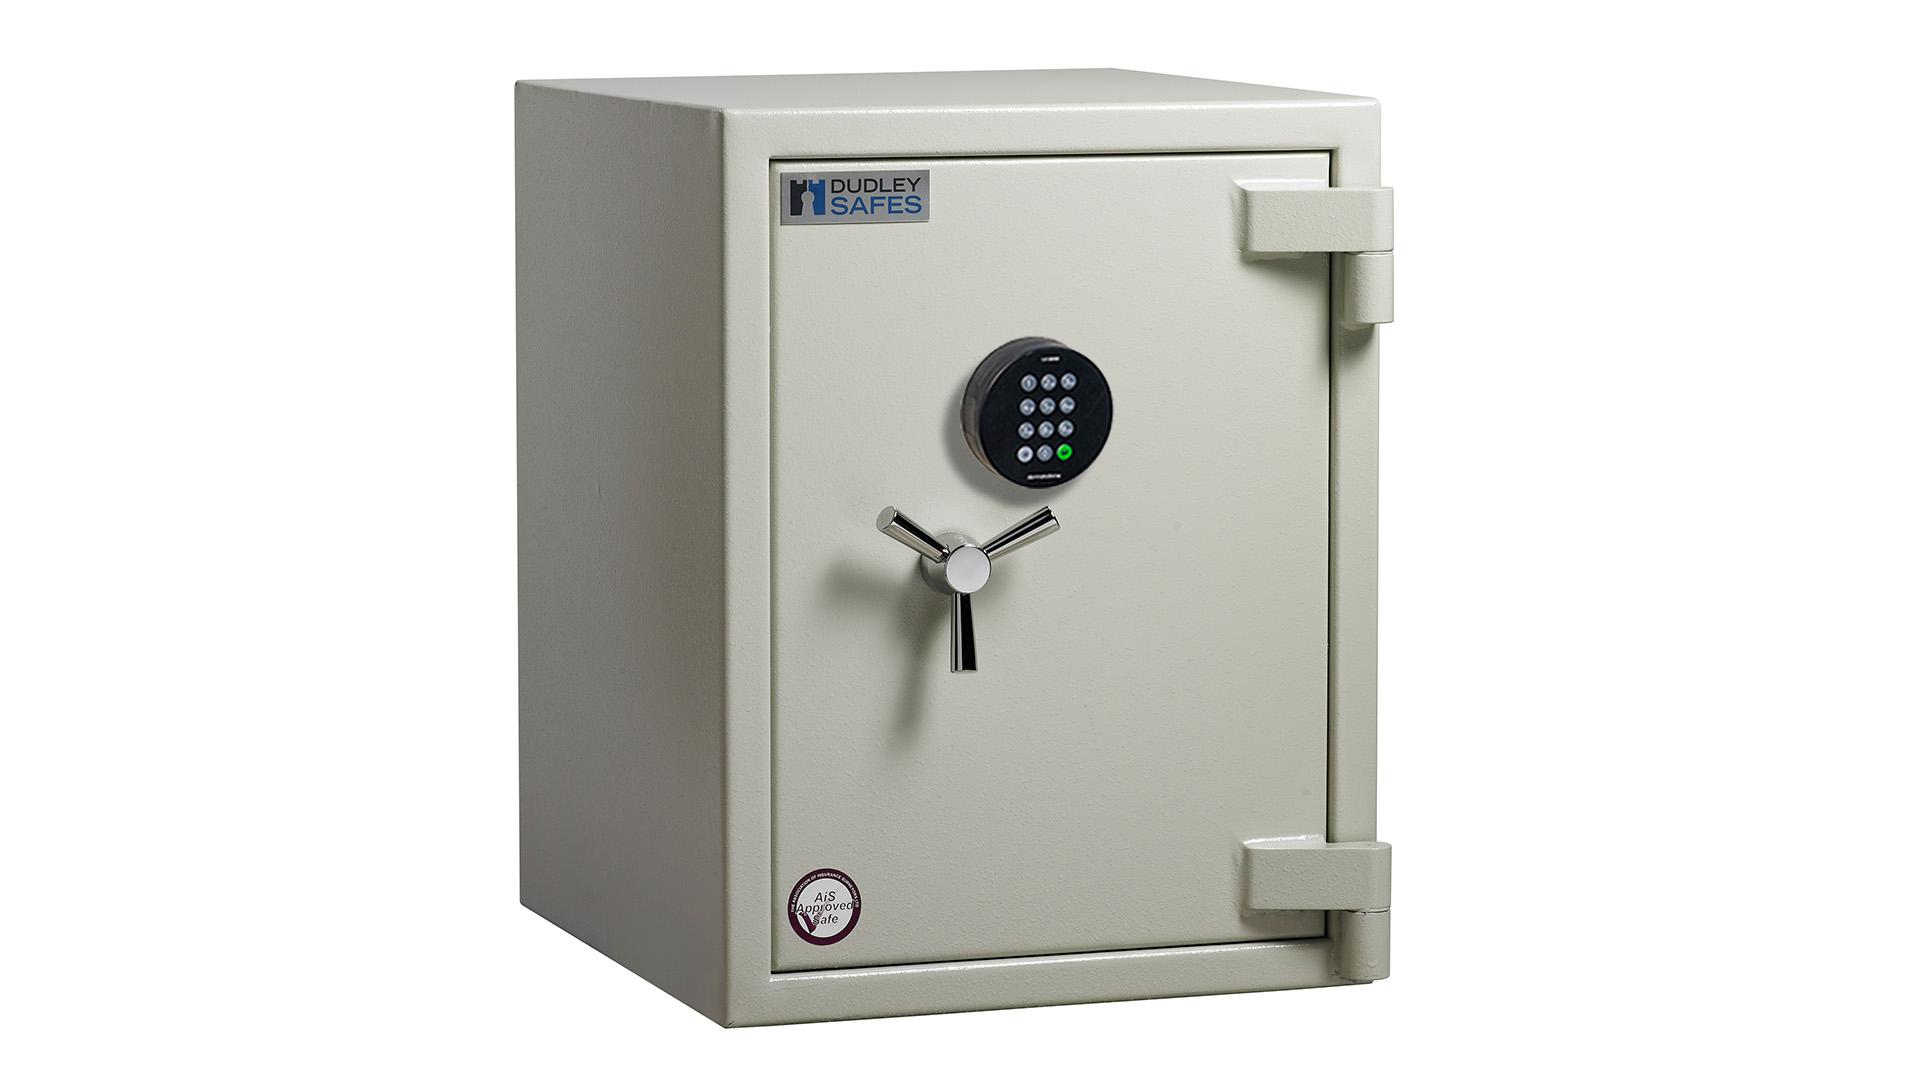 The Dudley Europa EUR2-03Eis a hand build, heavy duty euro grade 3 security safe for the home, commercial safe or office safe designed to protect cash and valuables. There's a bit of weight to this desk high safe and we do recommend professional install. This comes with a high security electronic code lock that's easy to programme. It is also available with a key lock, audit lock and mechanical dial combination lock.